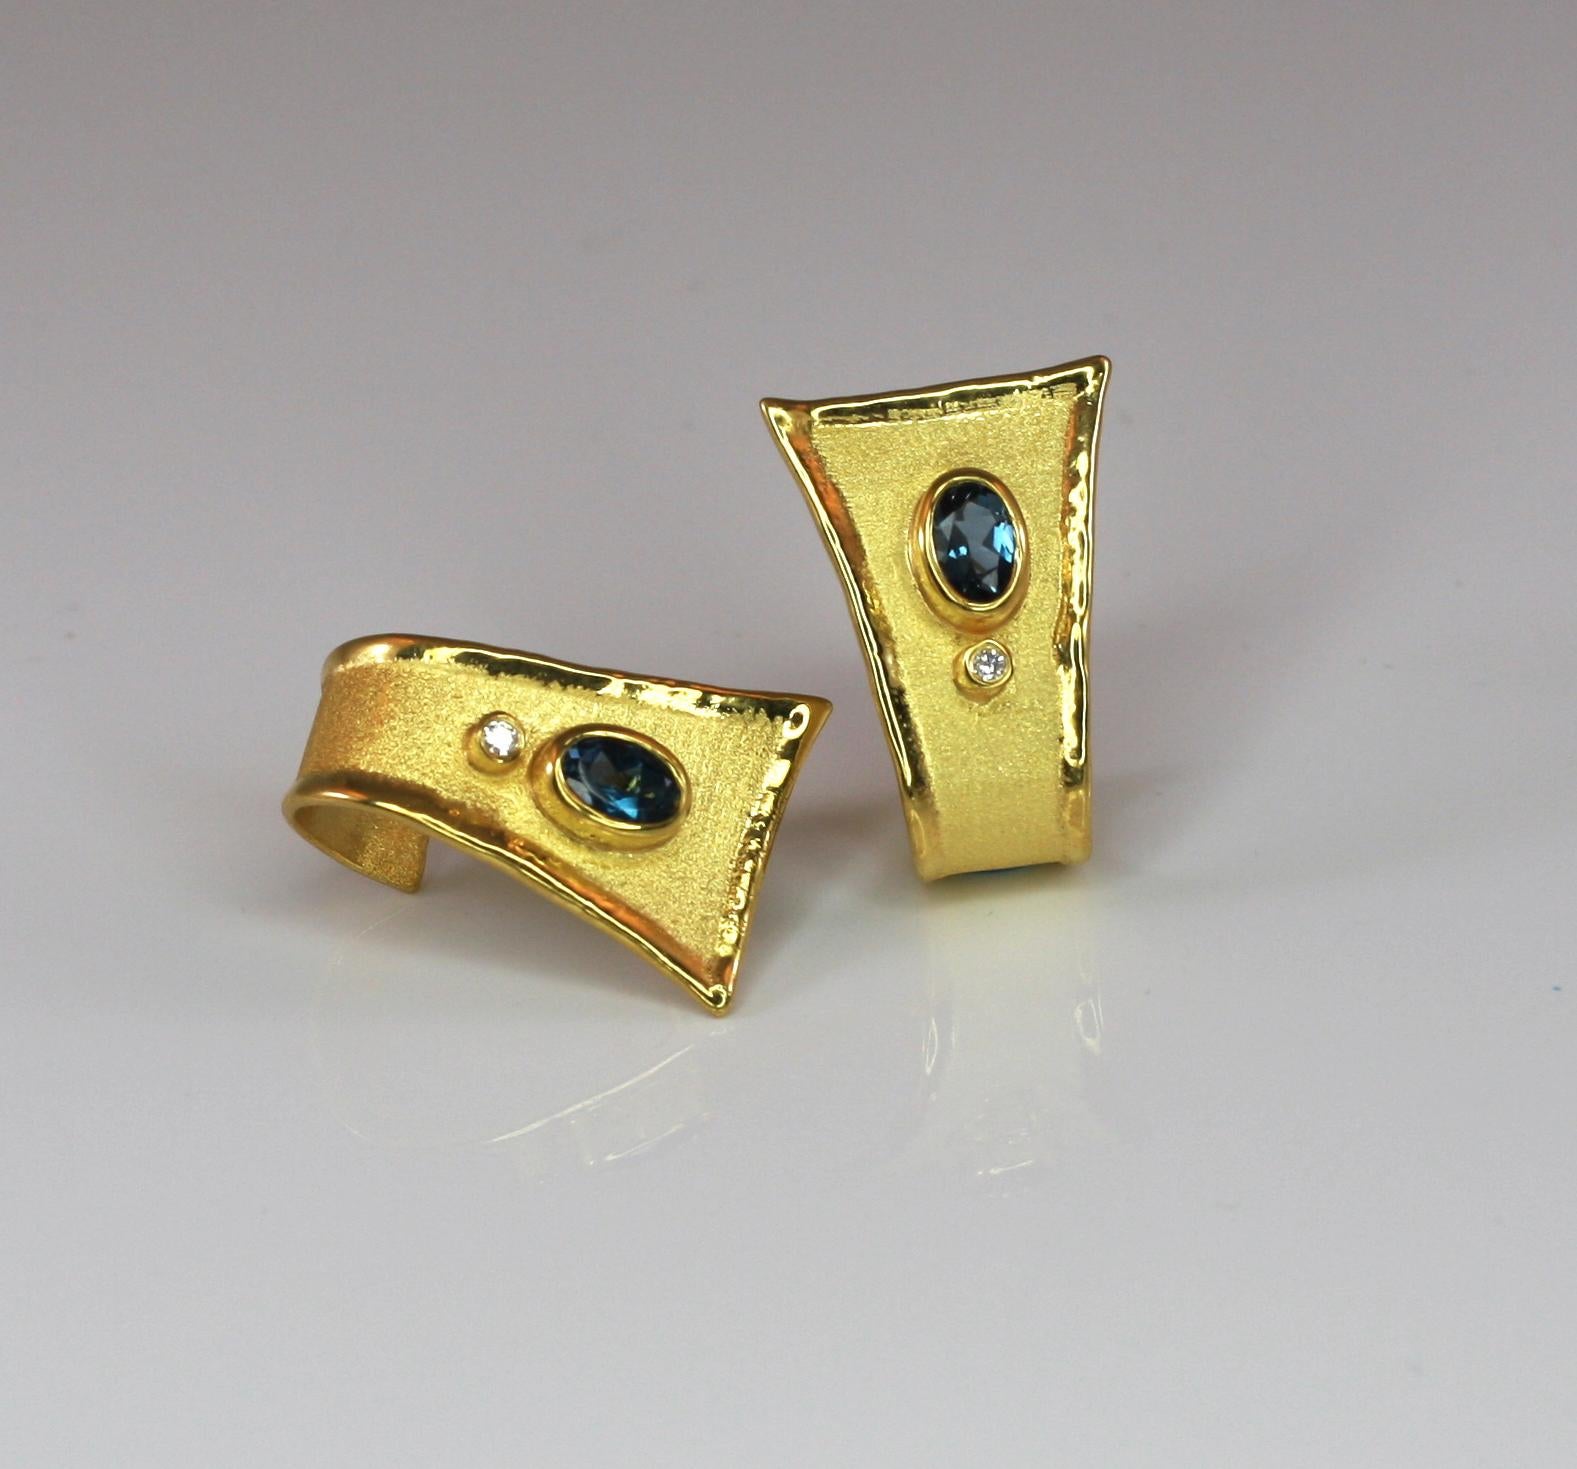 Yianni Creations 2.20 Carat Blue Topaz and Diamond Earrings in 18 Karat Gold For Sale 11